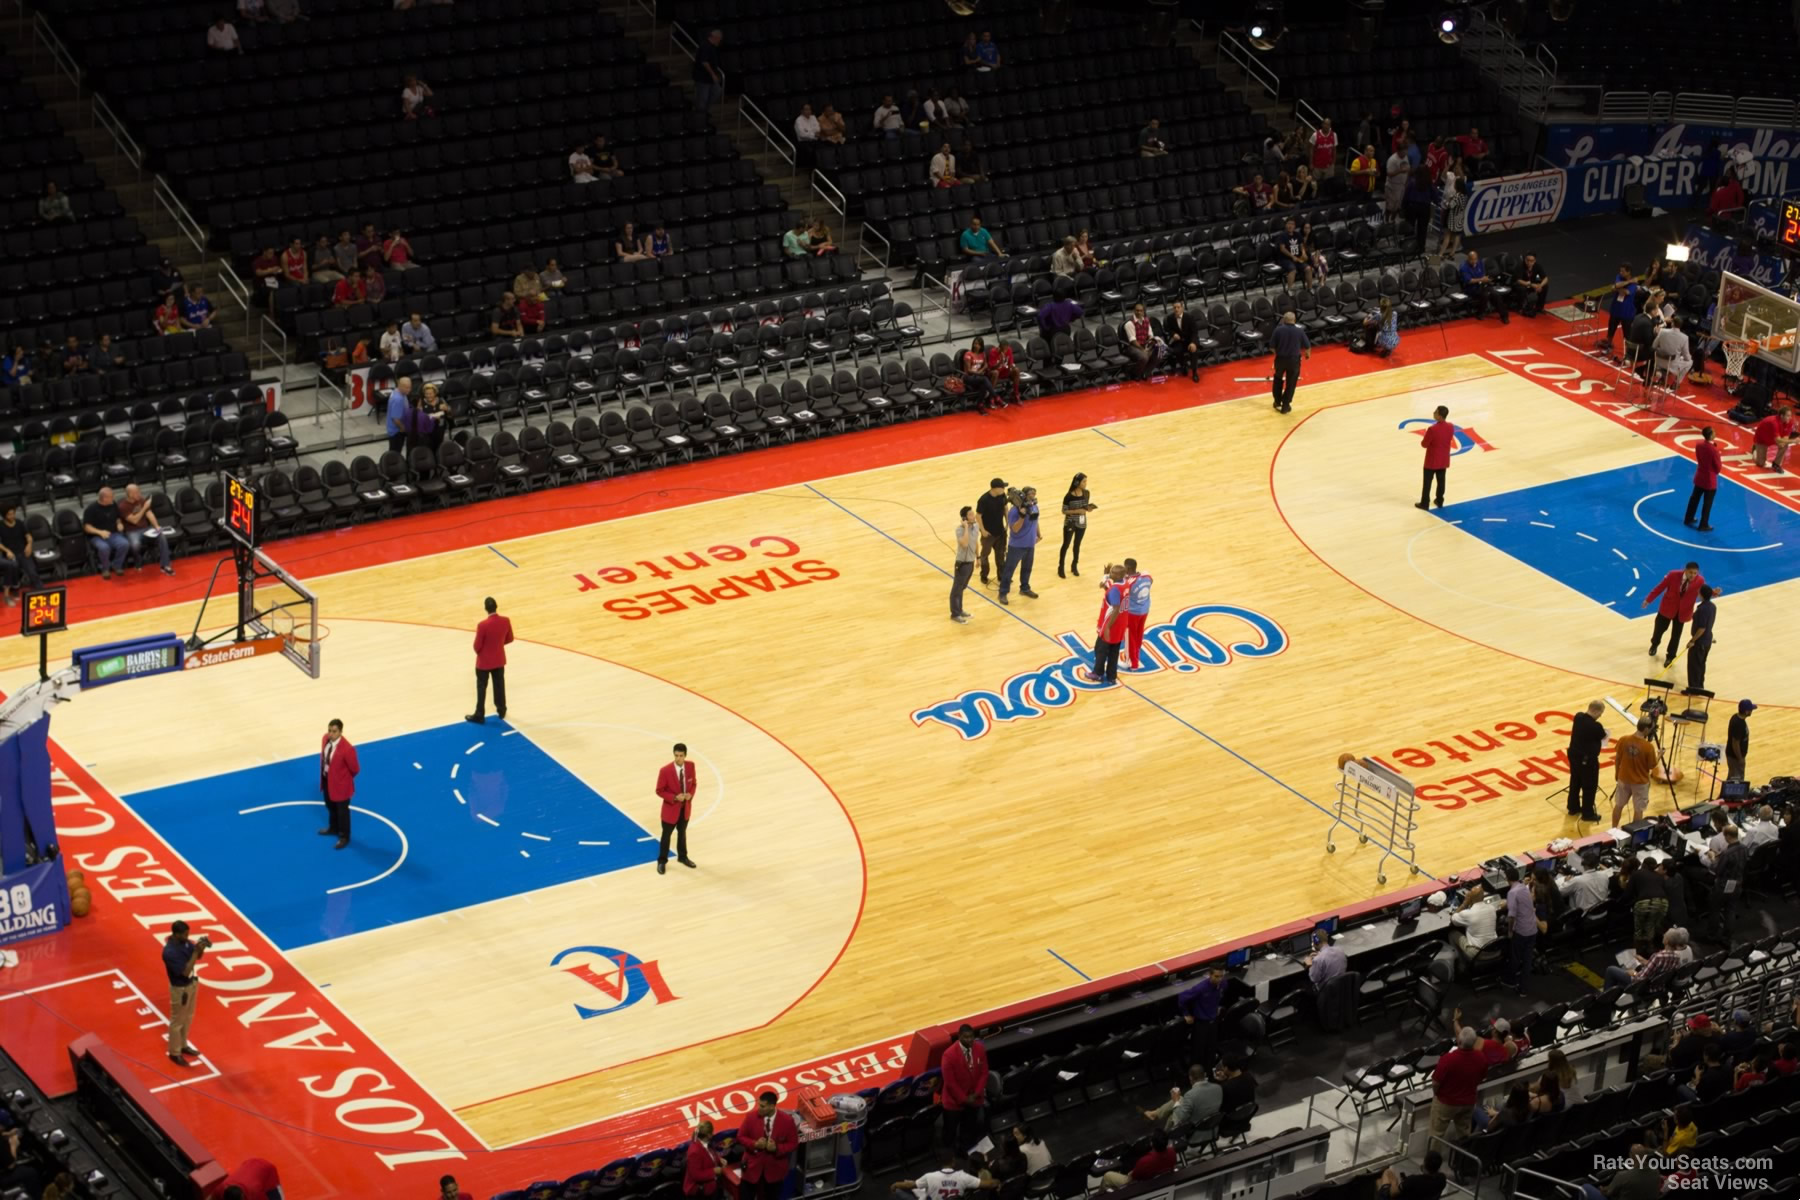 Staples Center Section 304 - Clippers/Lakers - RateYourSeats.com1800 x 1200